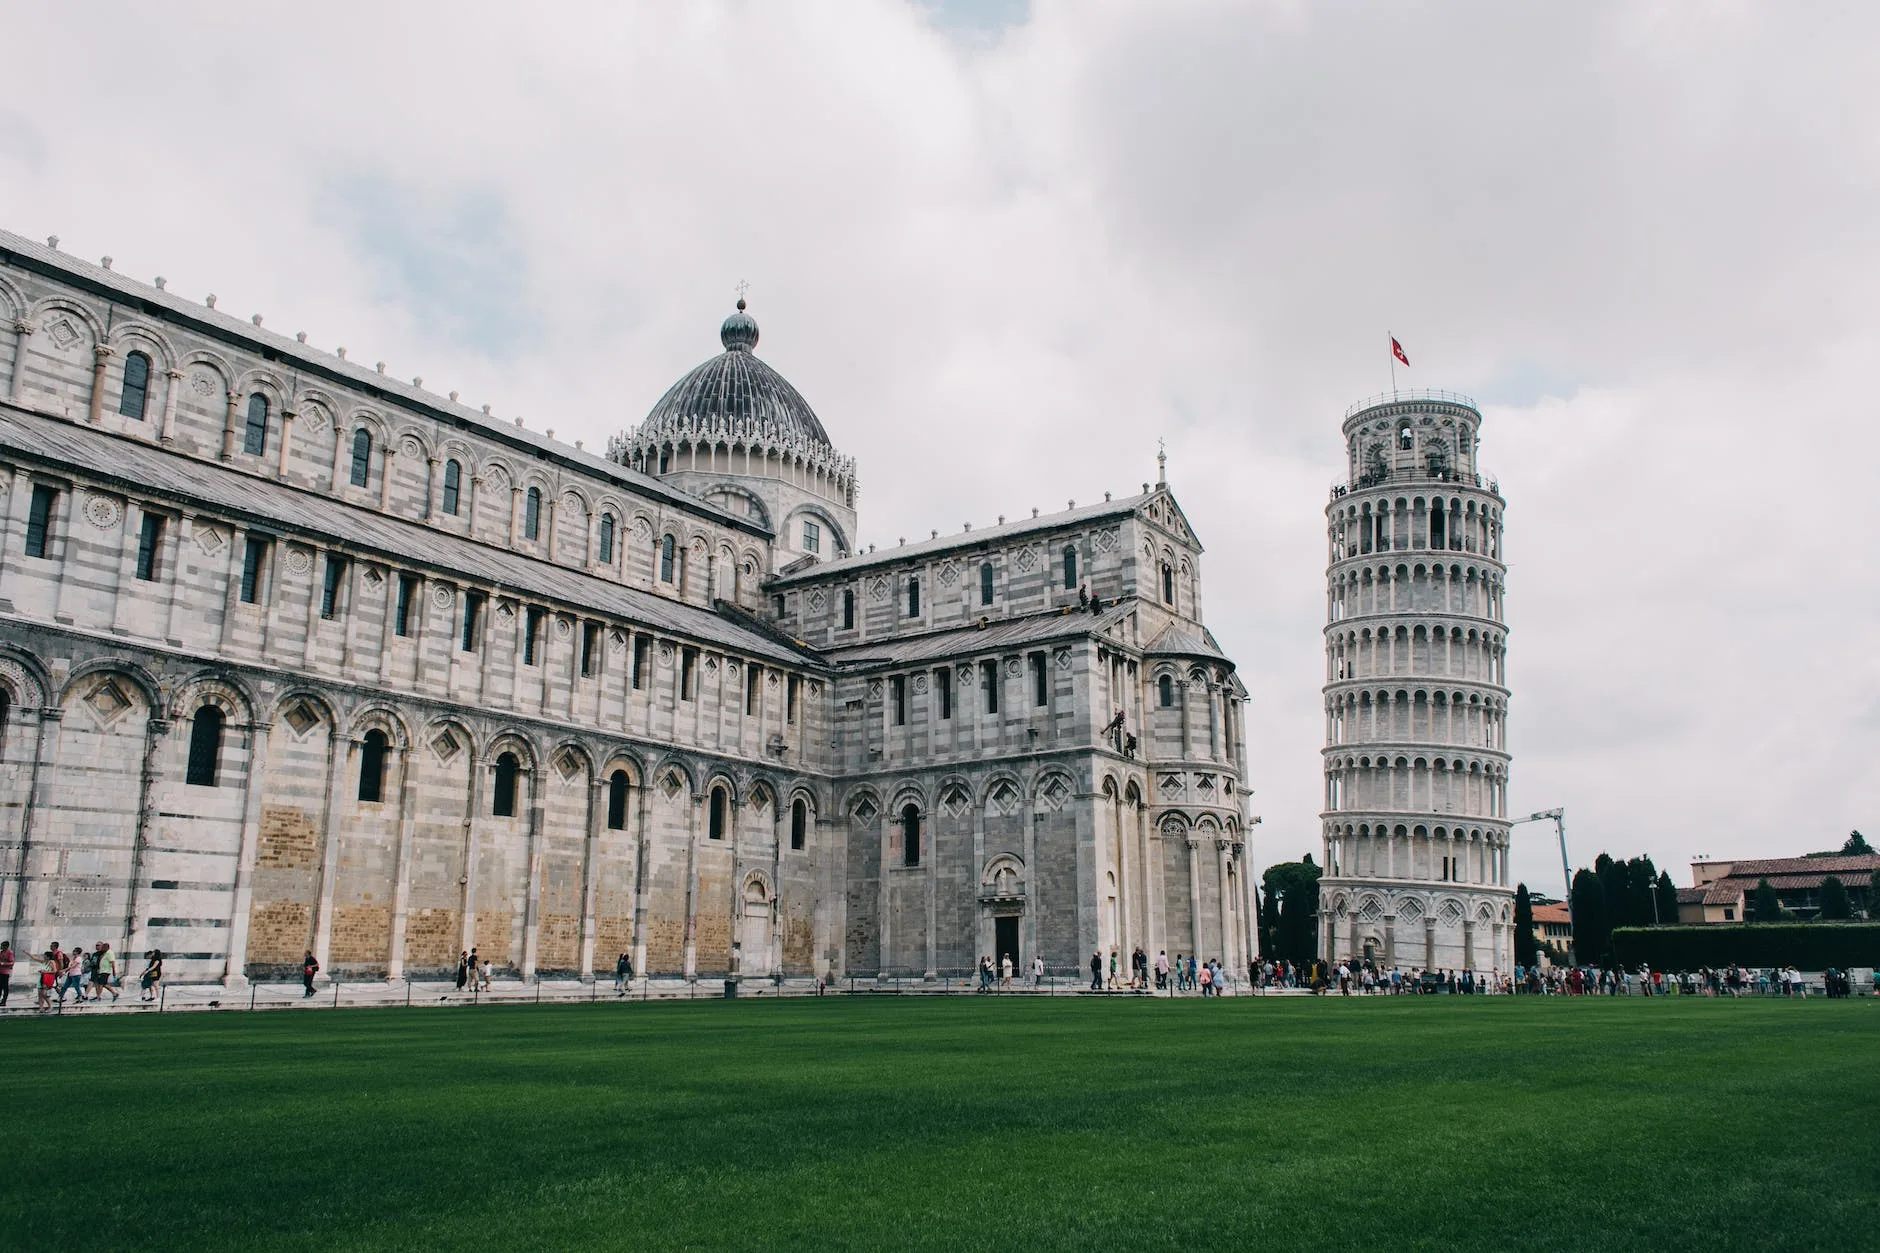 the famous pisa cathedral and leaning tower of pisa in italy